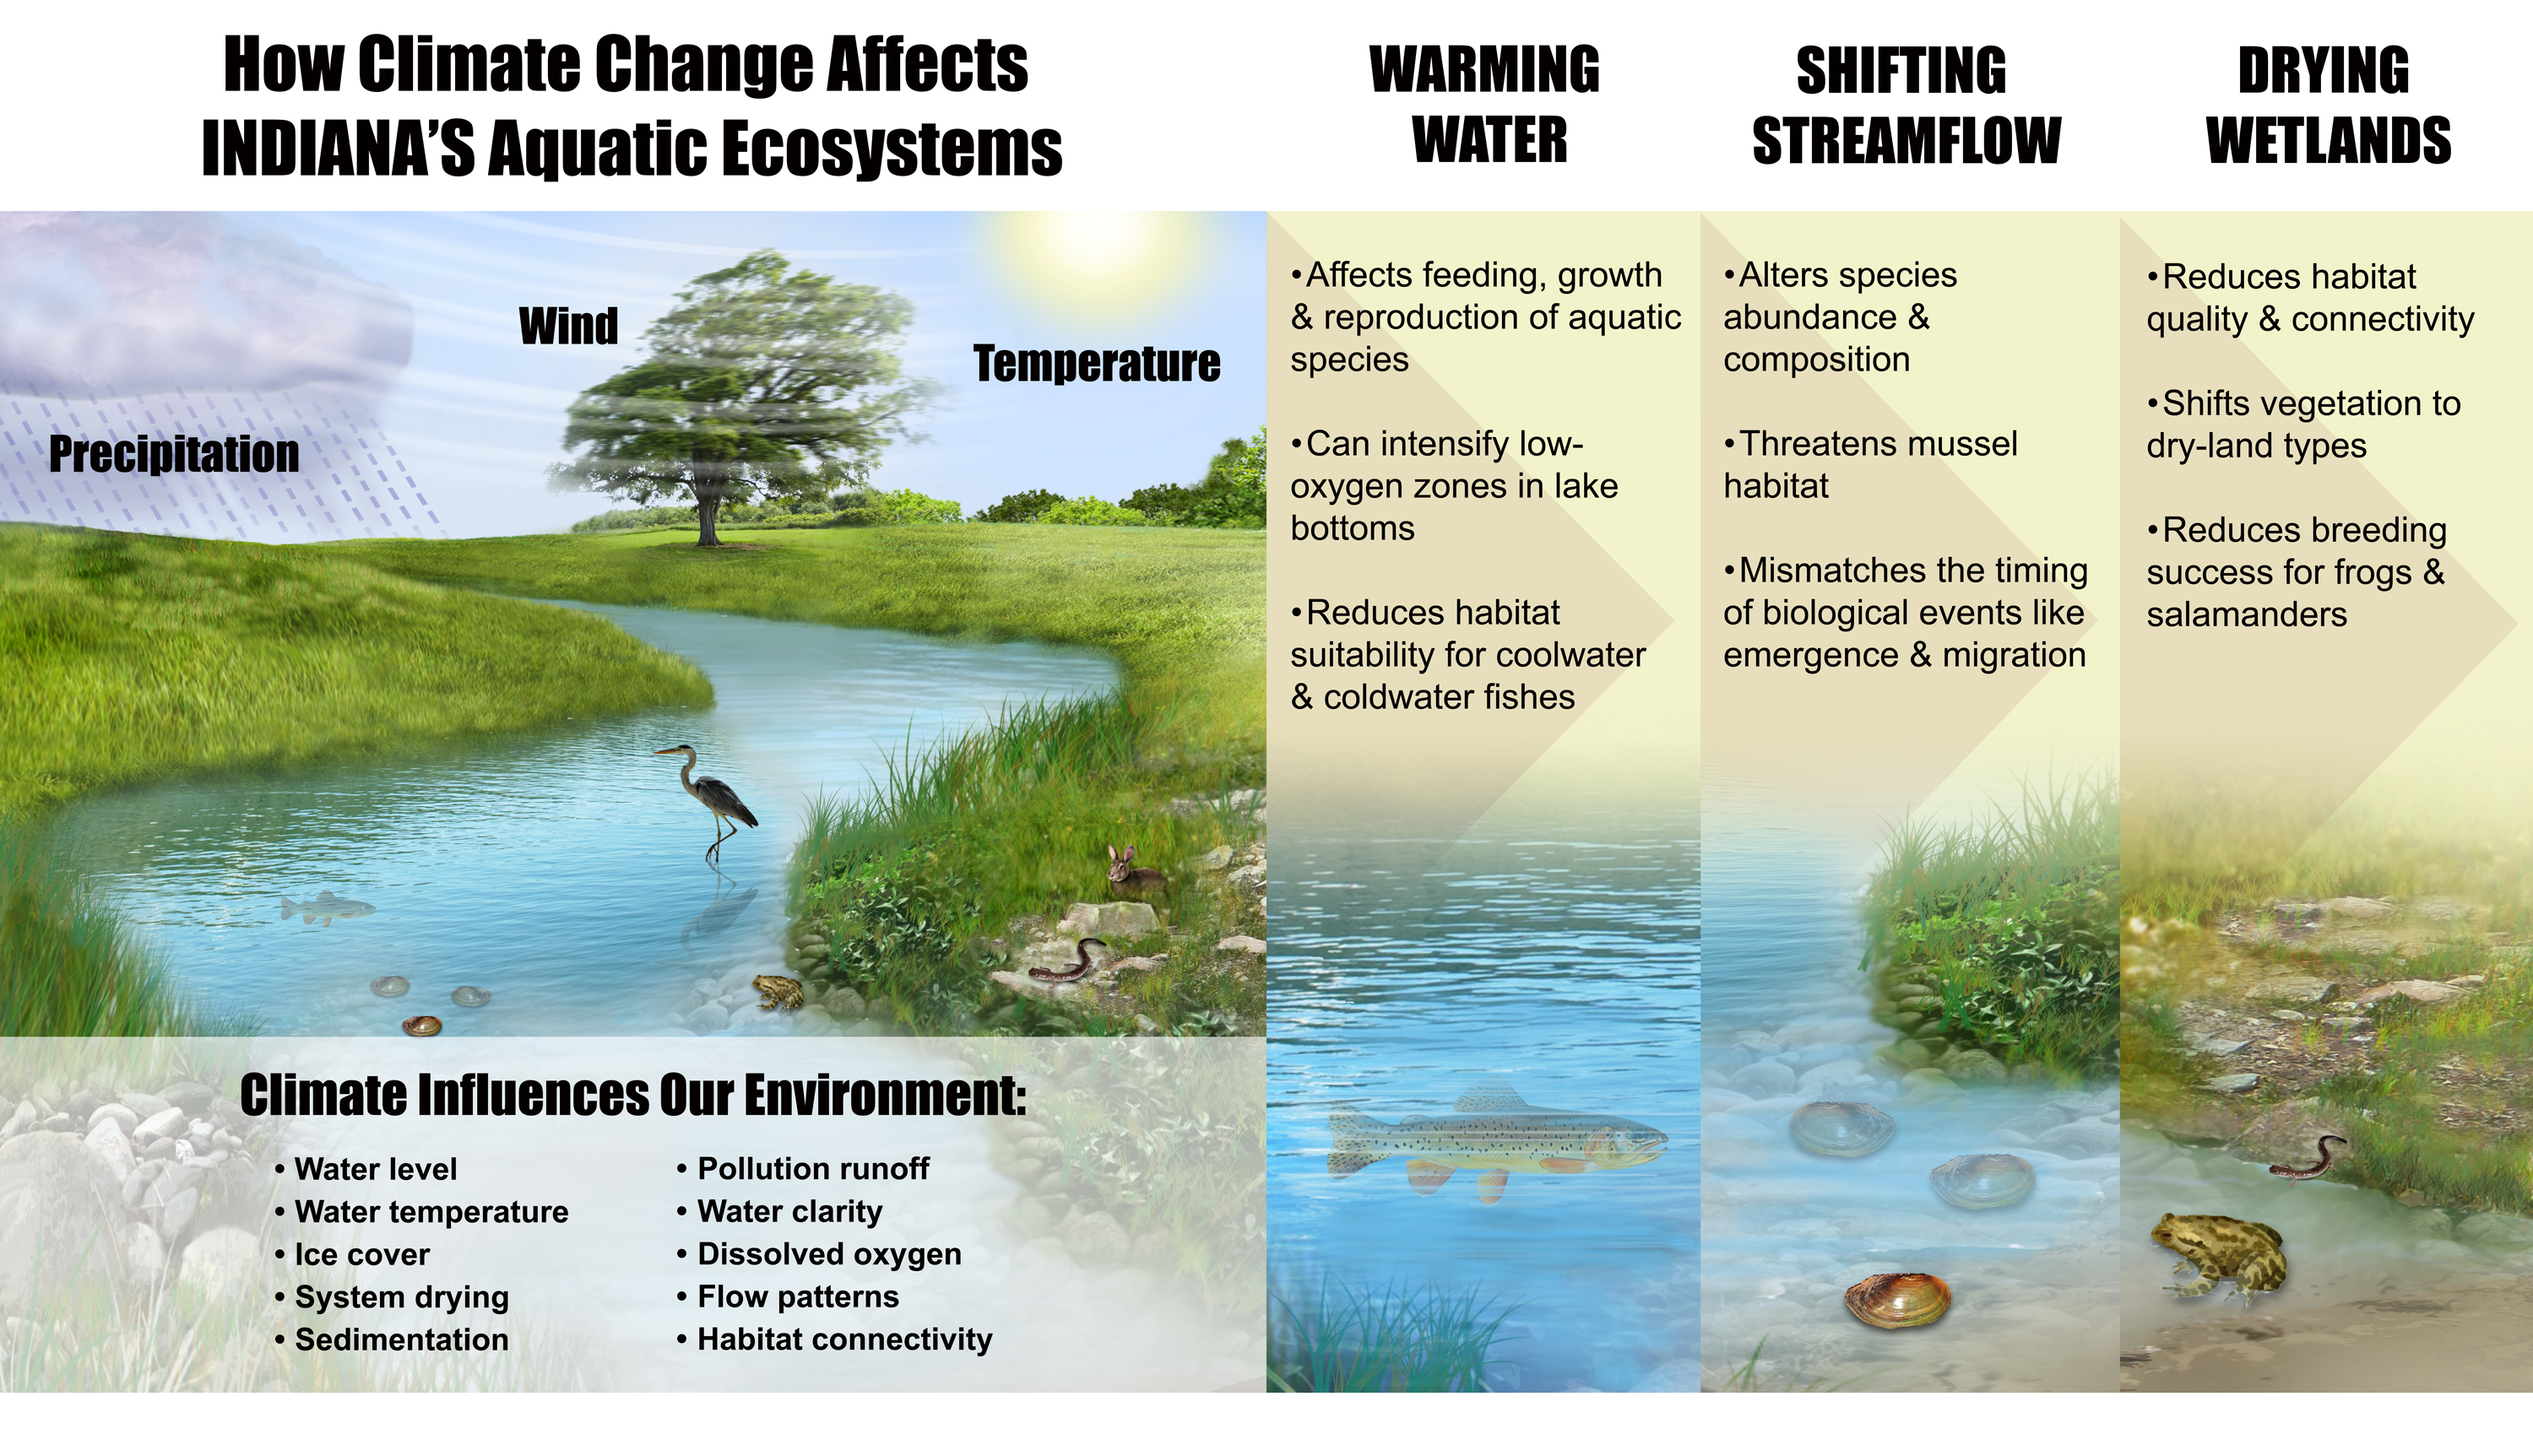 An illustration of a few of the key ways in which climate change will affect Indiana’s aquatic ecosystems.